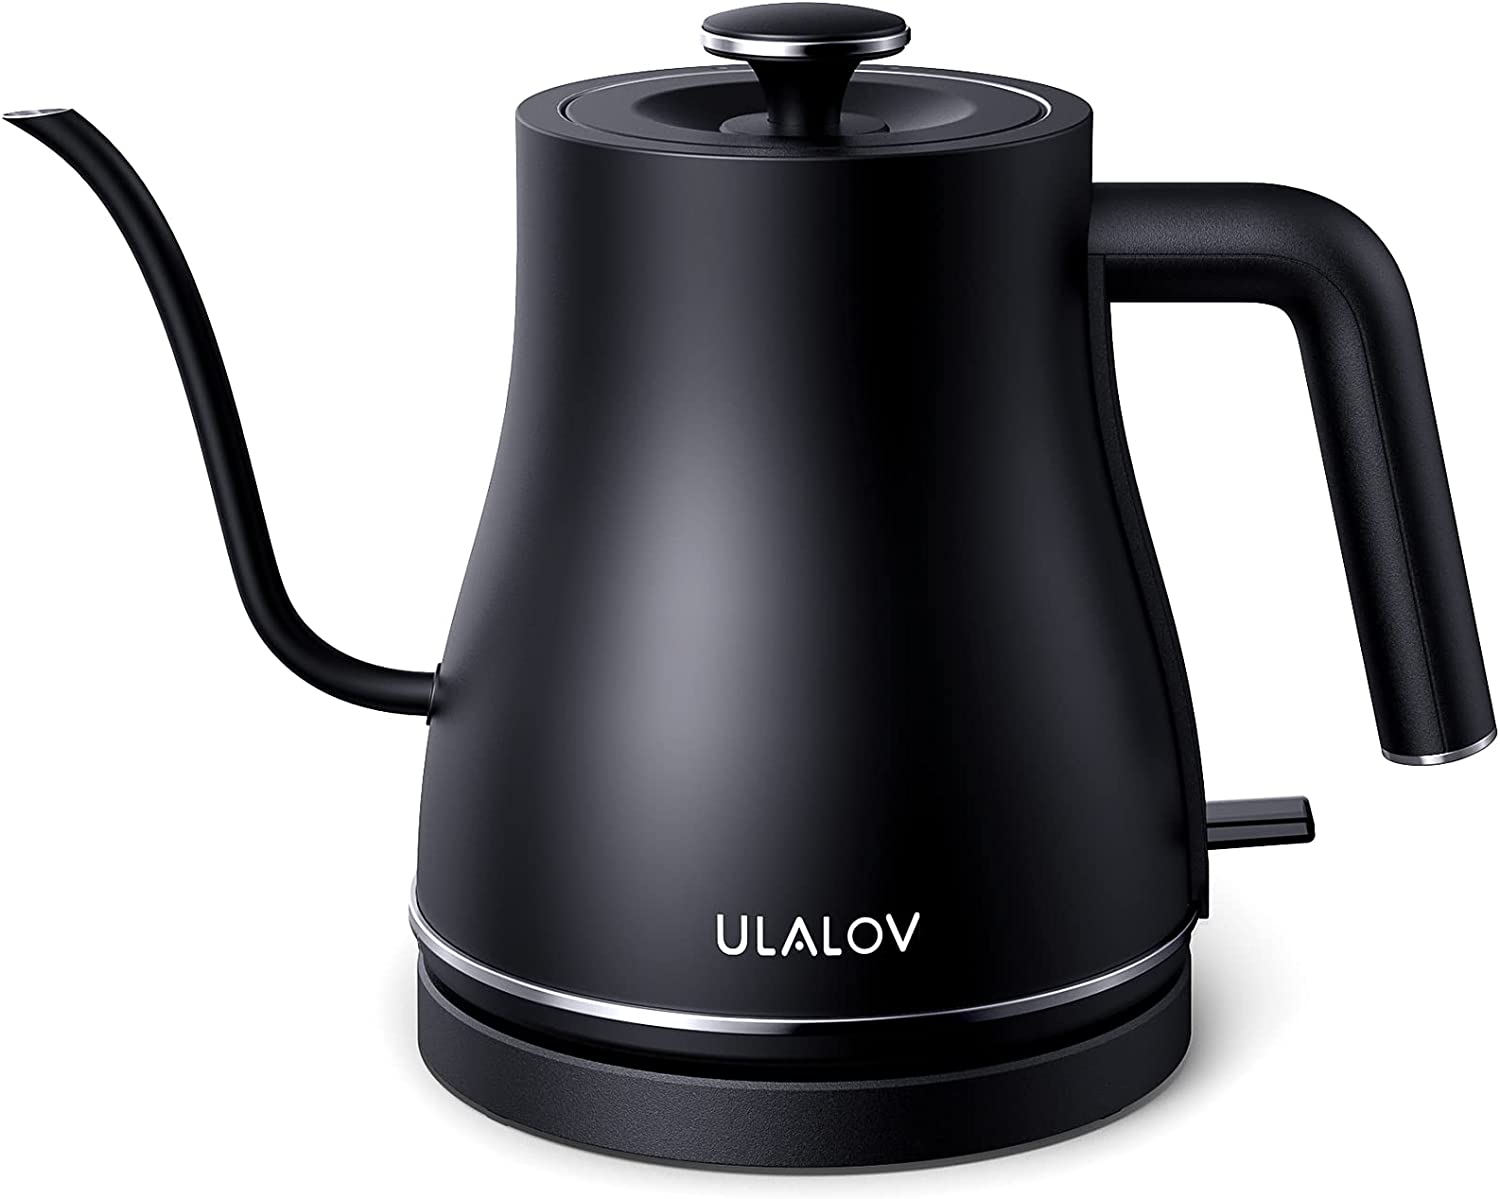 https://www.dontwasteyourmoney.com/wp-content/uploads/2022/09/ulalov-controlled-flow-bpa-free-electric-kettle-for-coffee-electric-kettle-for-coffee.jpg